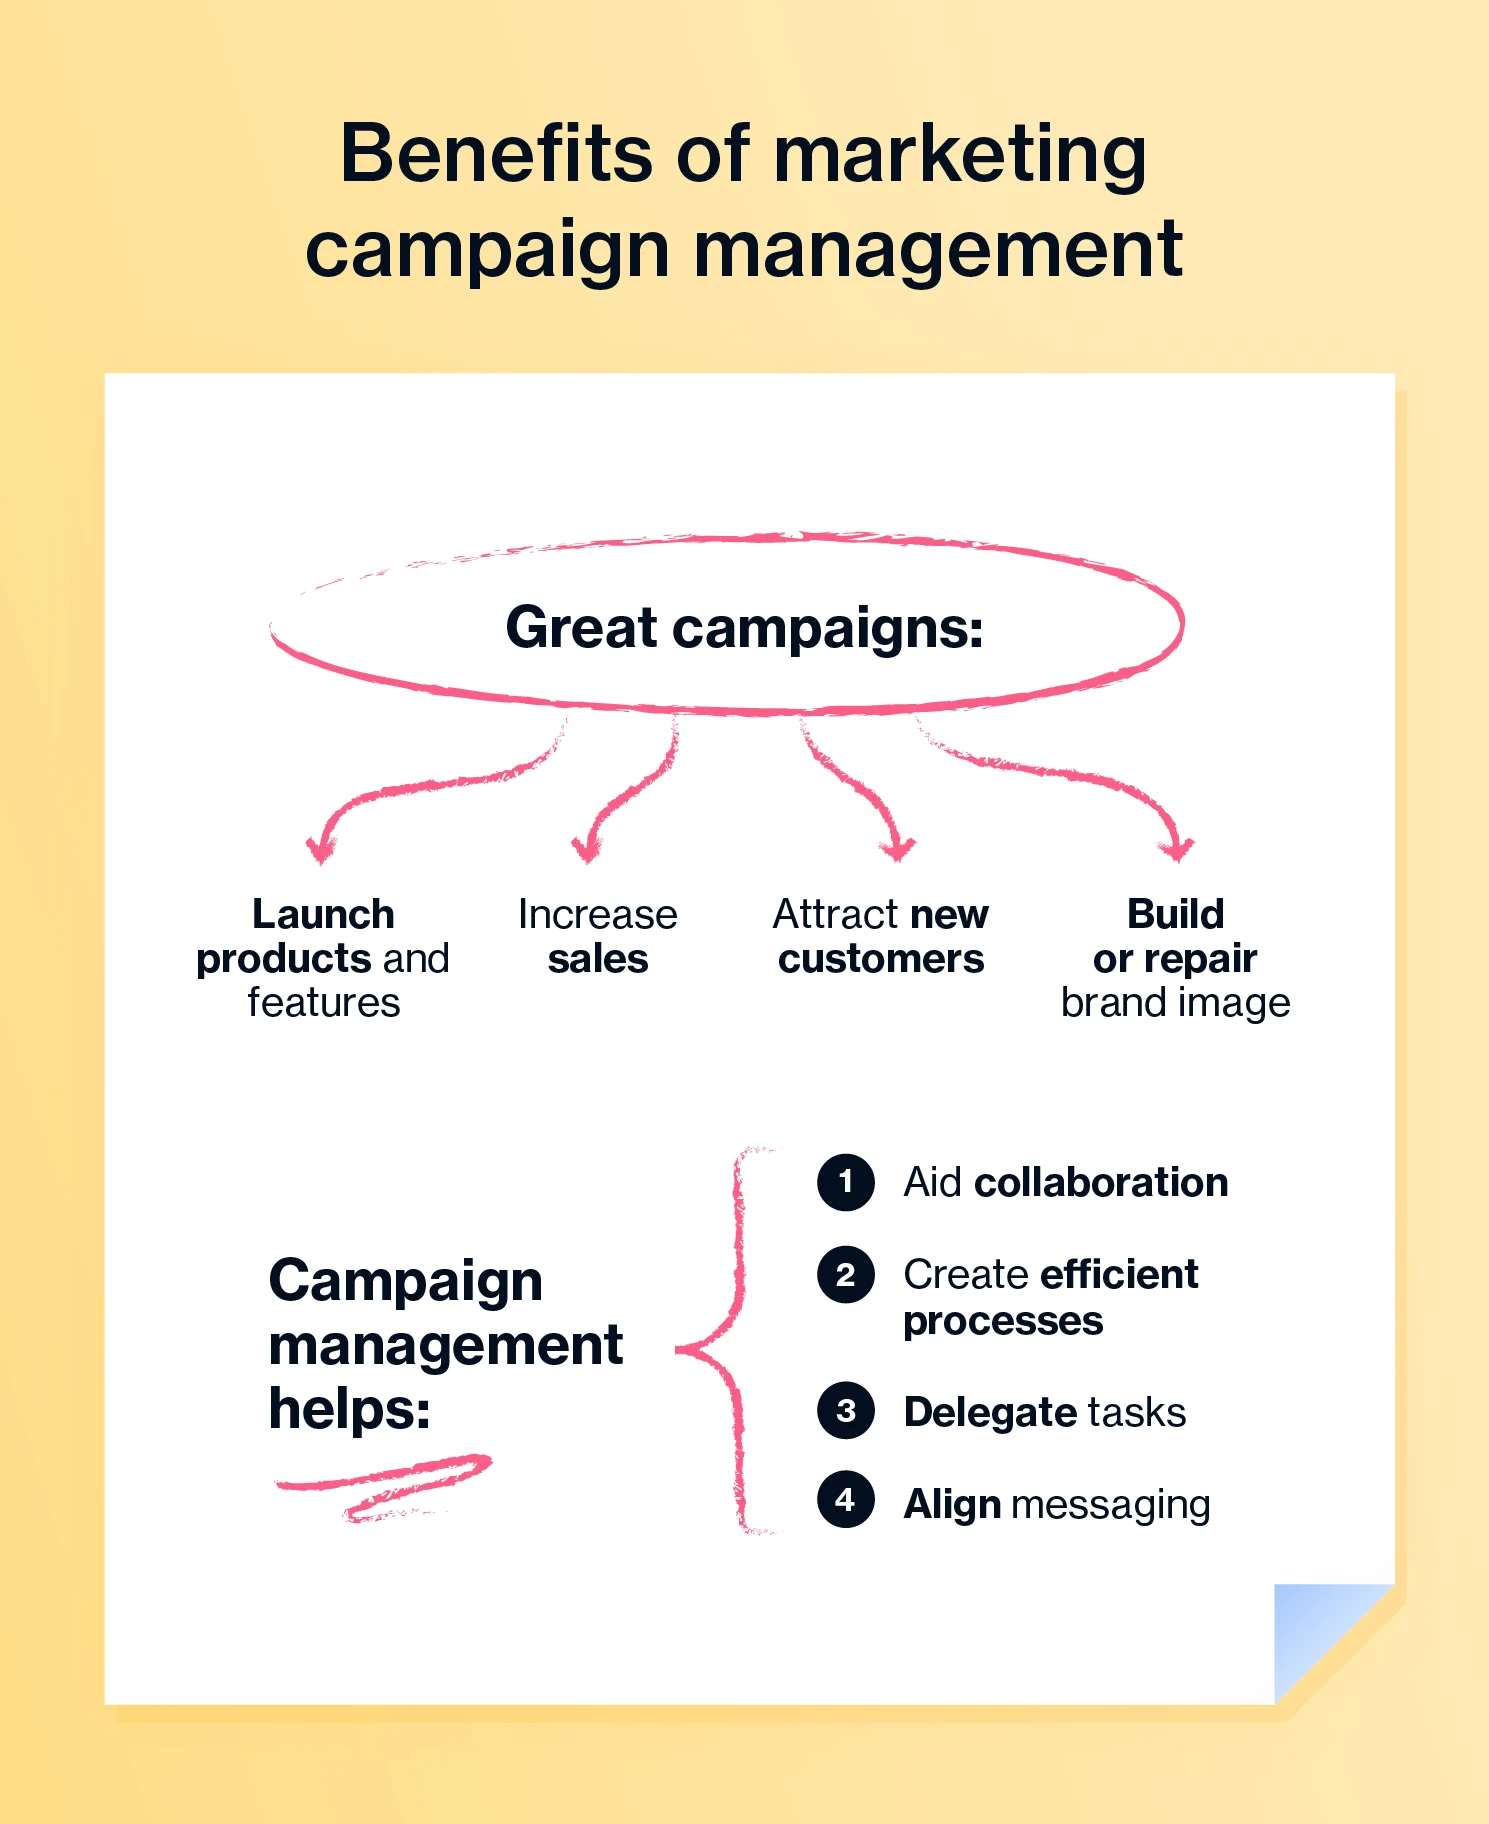 Benefits of marketing campaign management